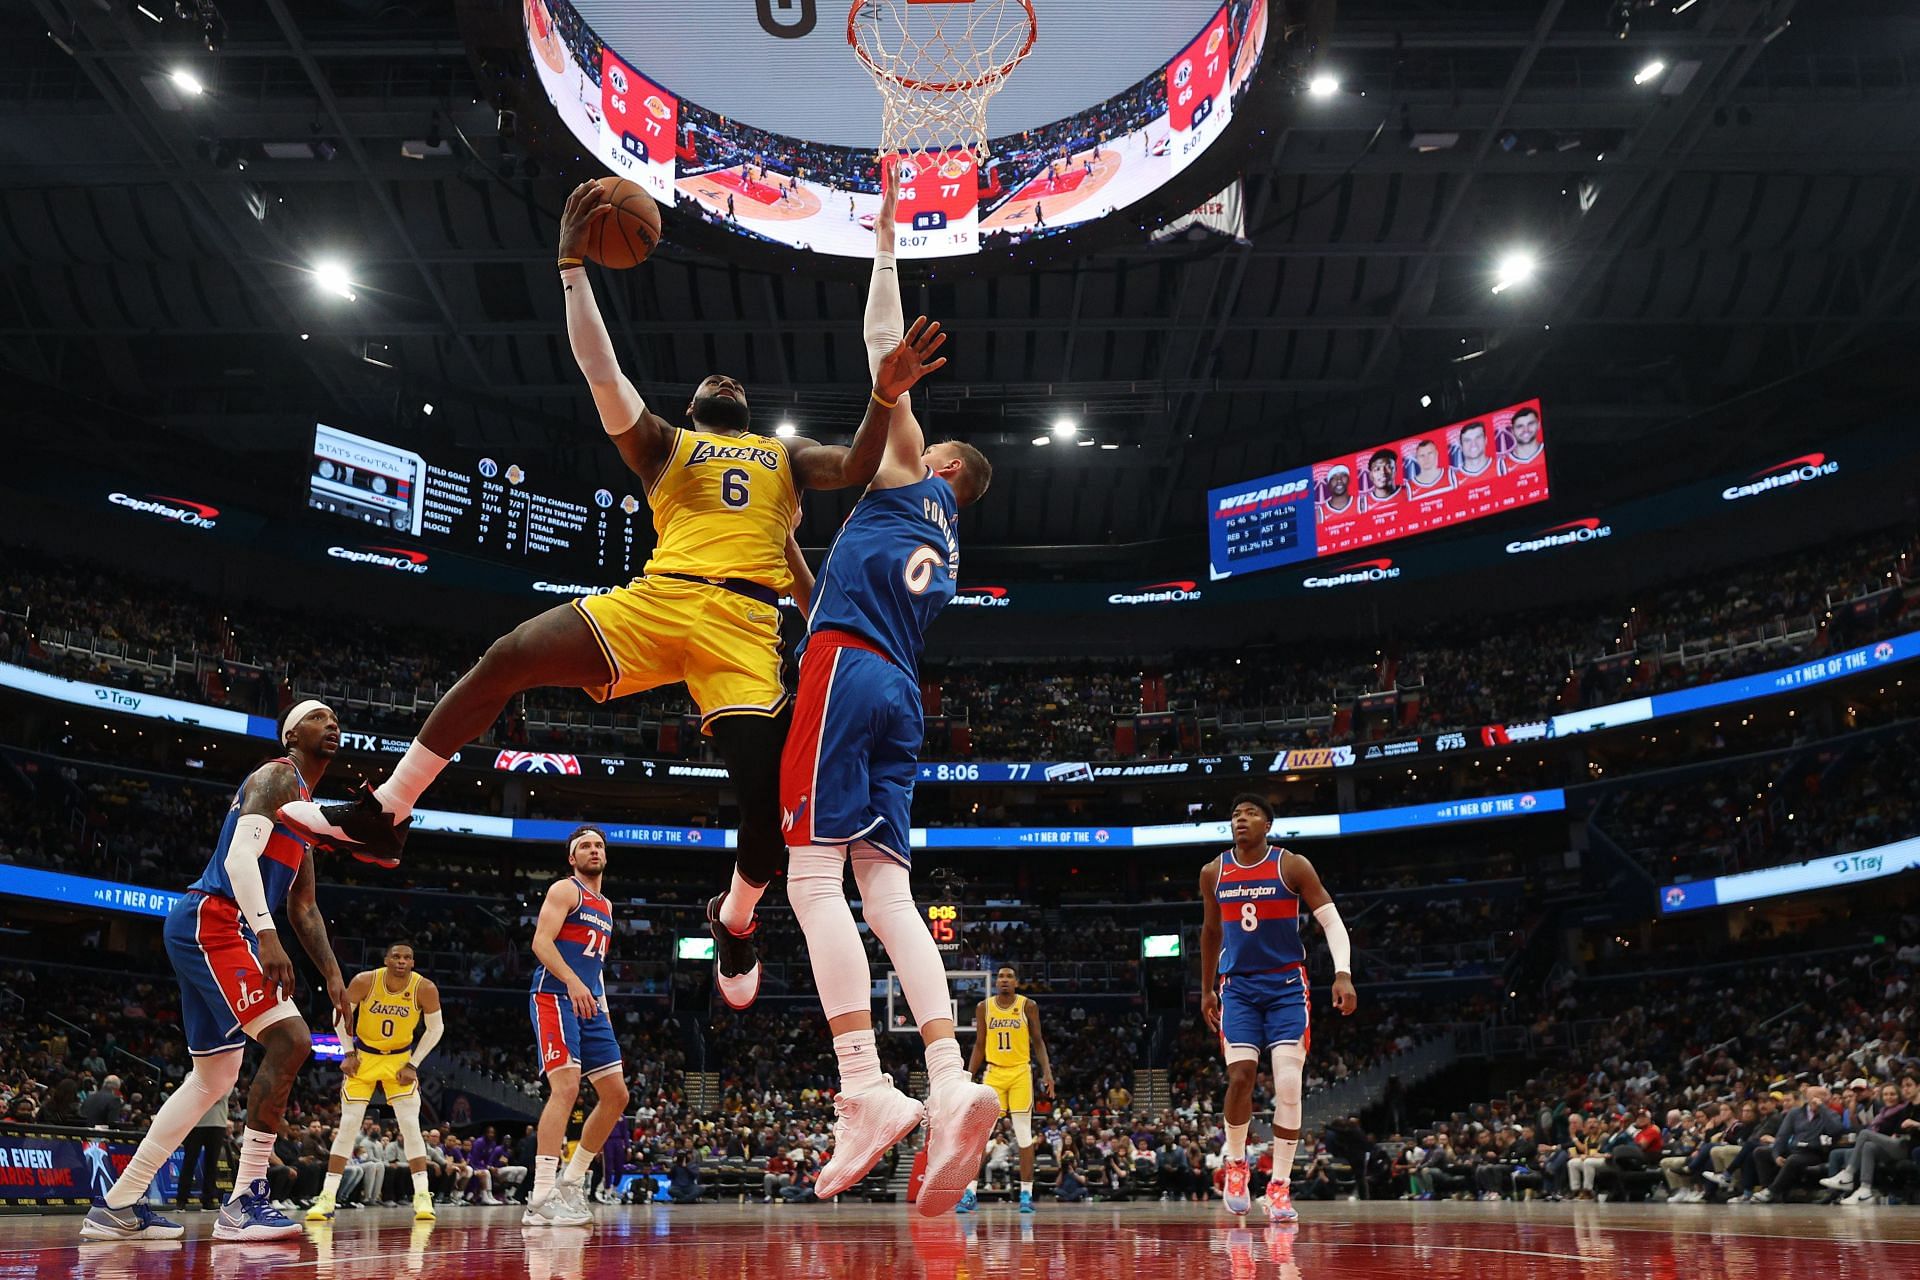 LeBron James #6 of the Los Angeles Lakers shoots the ball against the Washington Wizards